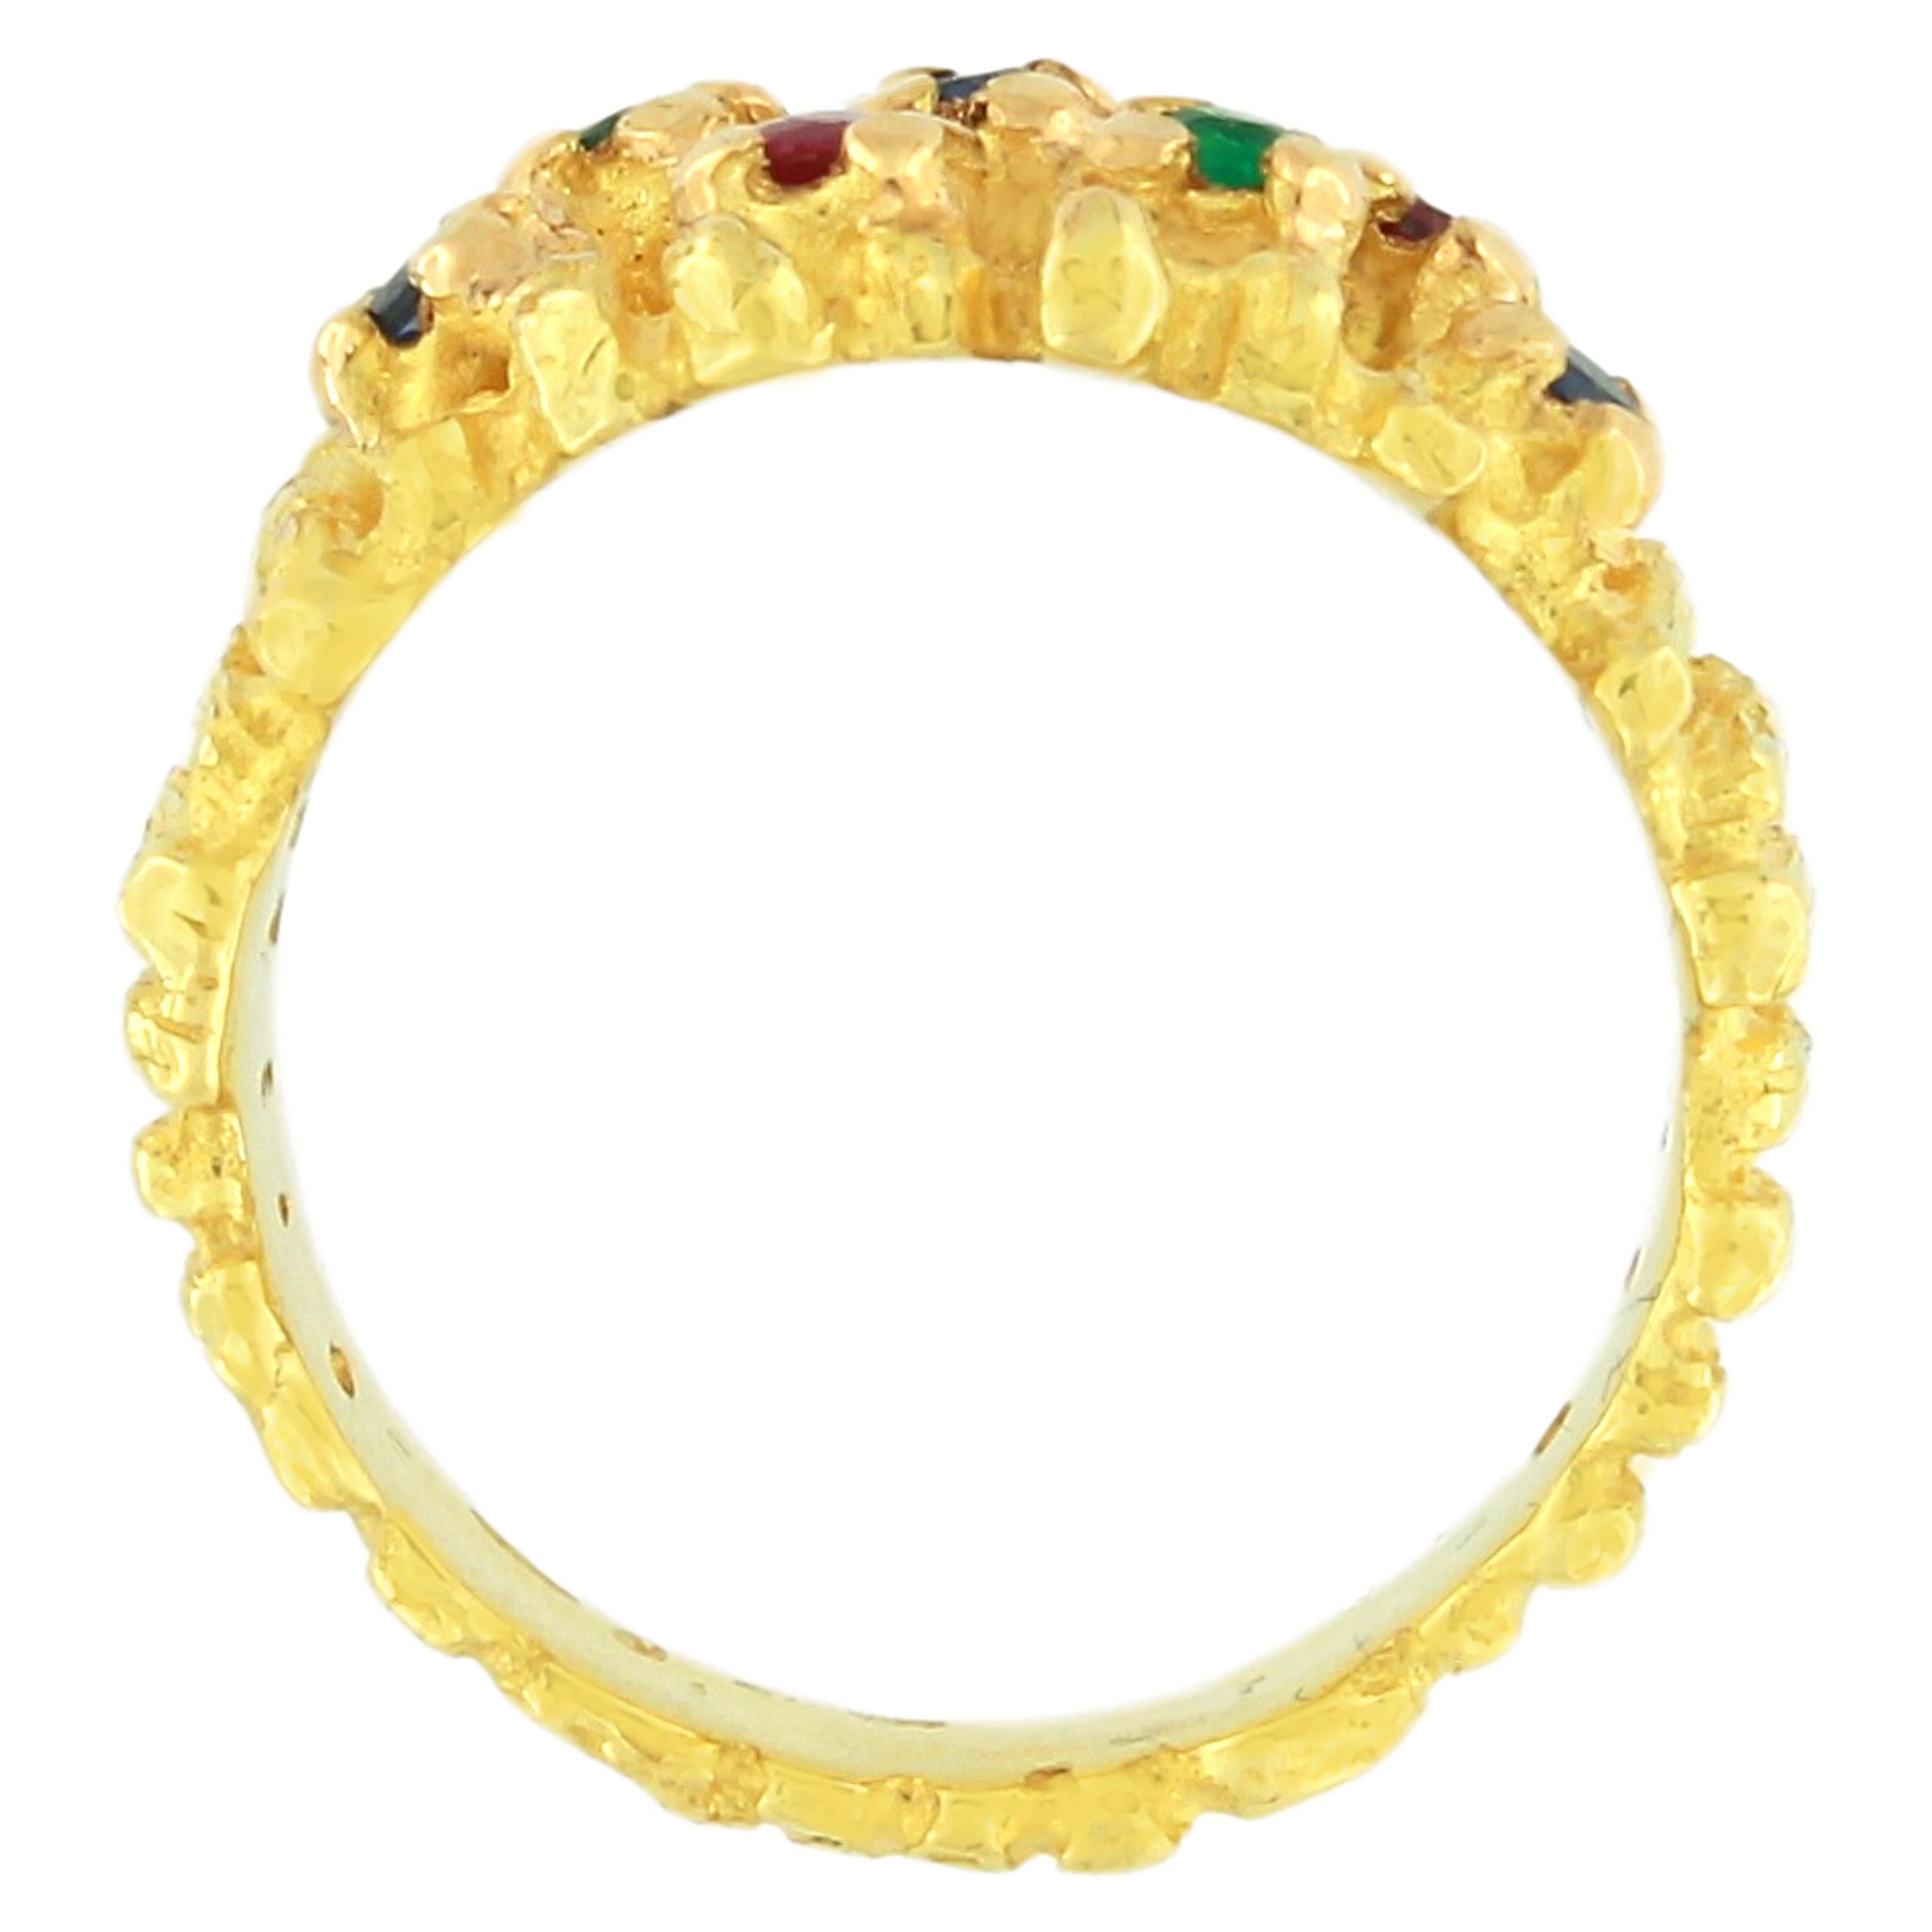 Contemporary Sacchi Ruby Emerald and Blue Sapphire Gemstone 18 Karat Gold Cocktail Ring For Sale